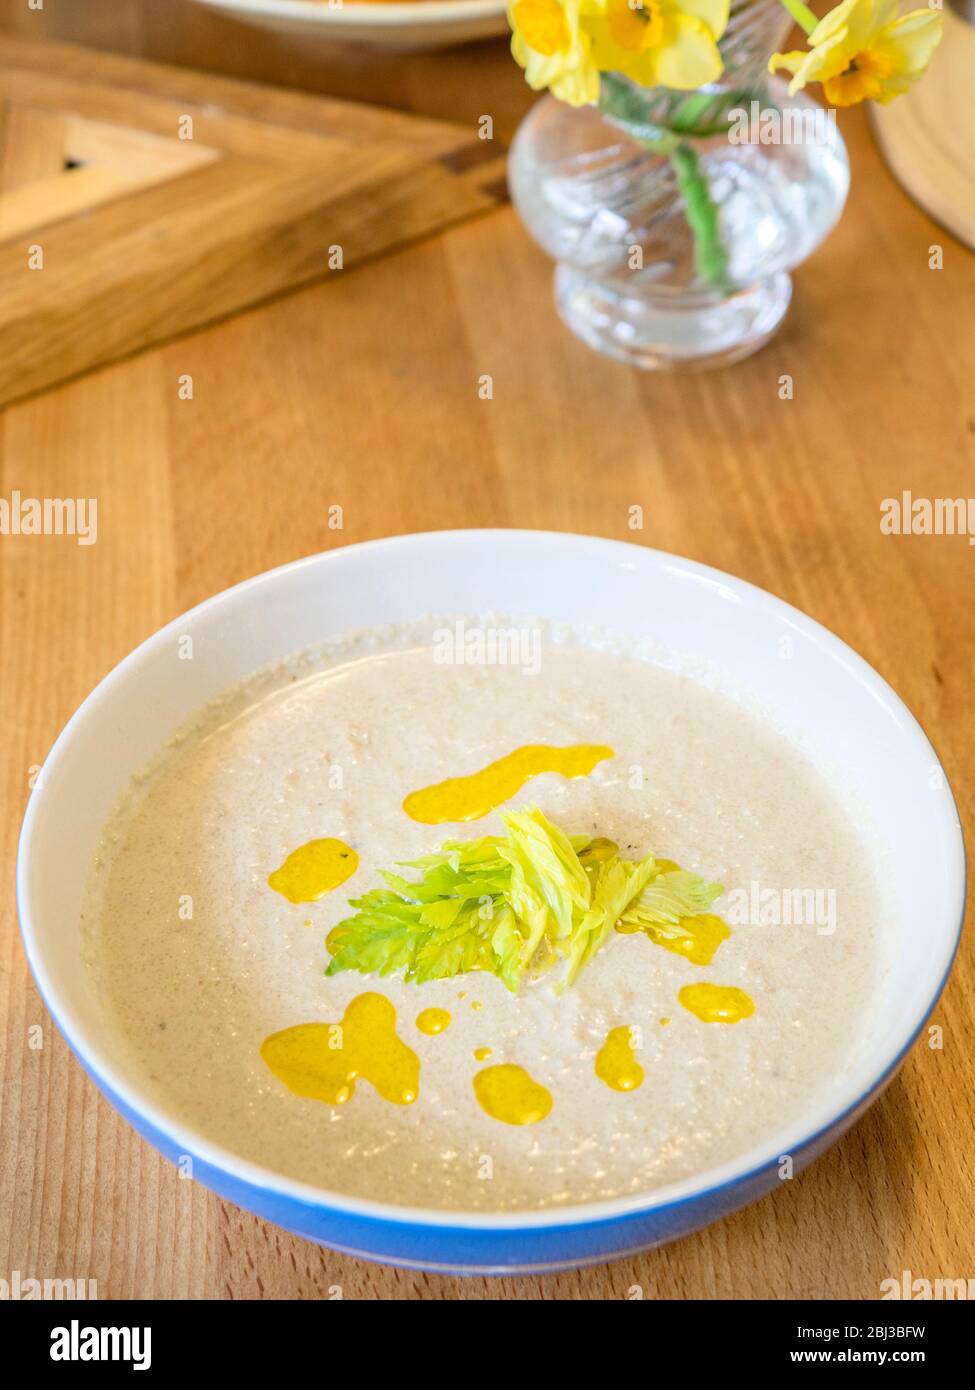 A bowl of chilled celery soup made with Waldorf salad ingredients drizzled with rapeseed oil with a celery leaf garnish Stock Photo